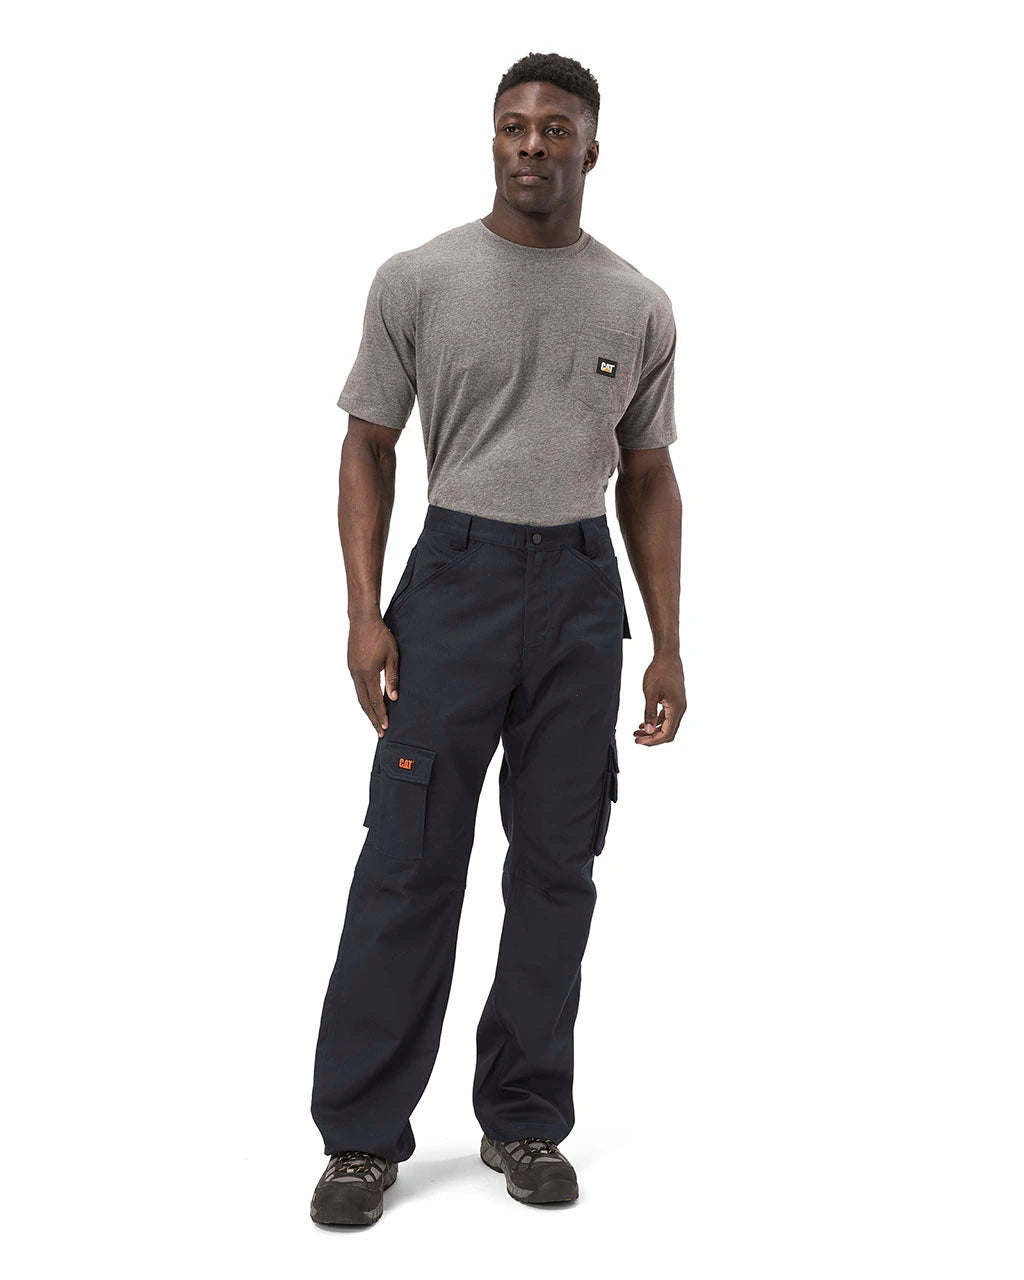 Check Polycotton Industrial Work Wear Cargo Pants, Gray, Slim Fit at Rs 950  in Rajsamand